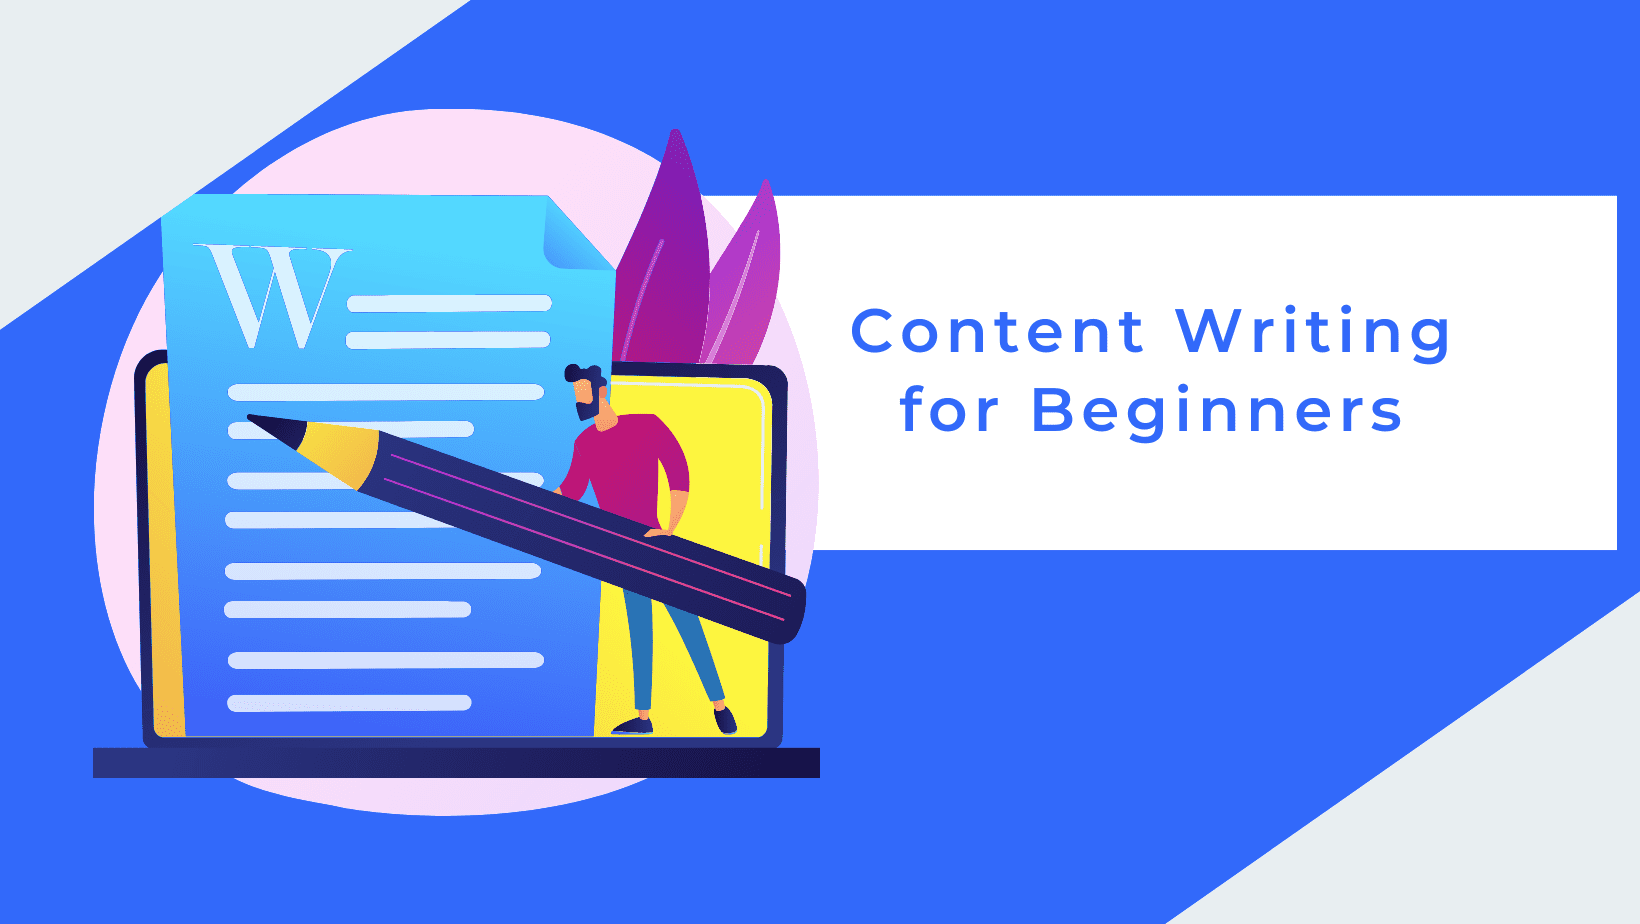 A guy writing in a huge paper and pencil representing this article about content writing for beginners